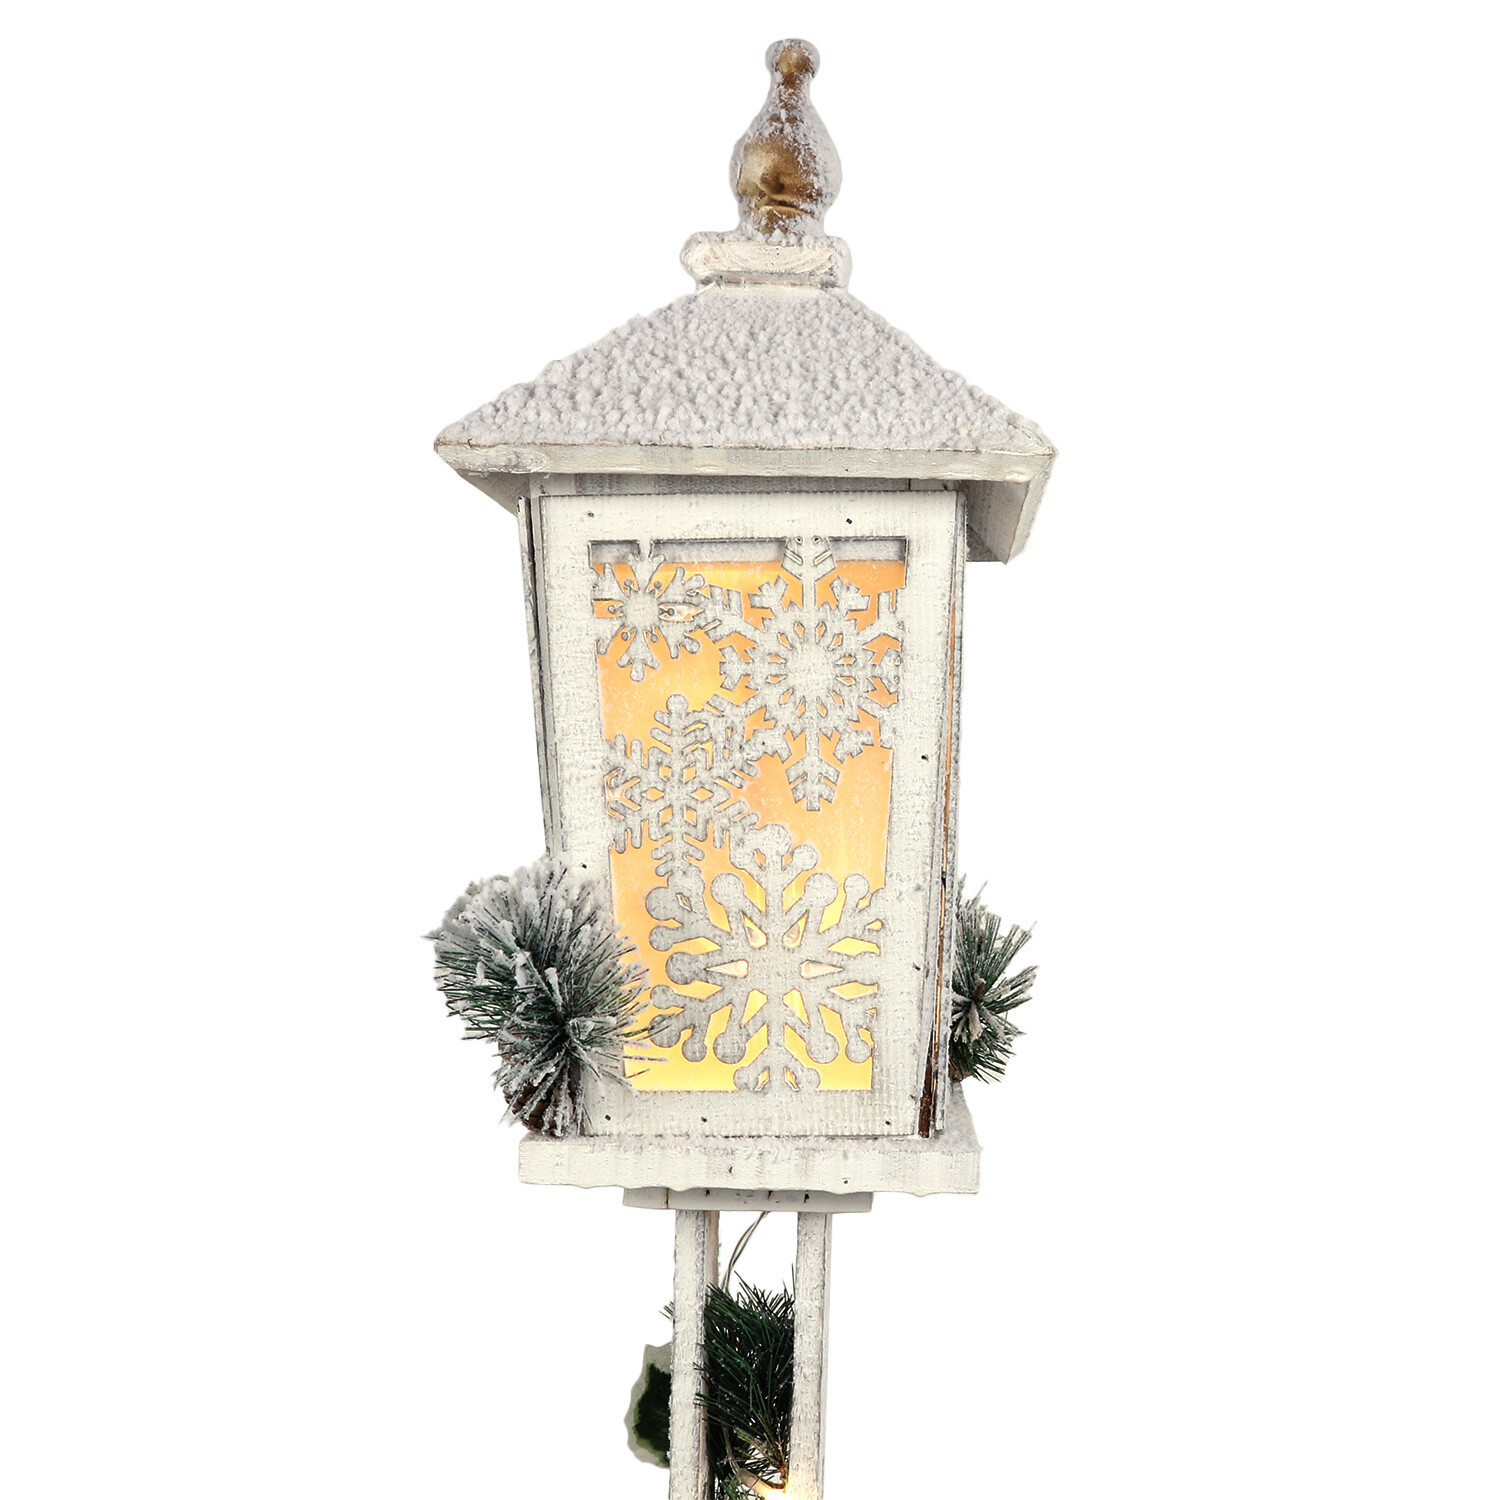 Frosted Fairytale White Snowy Wood Lantern Decoration Ornament Image 4